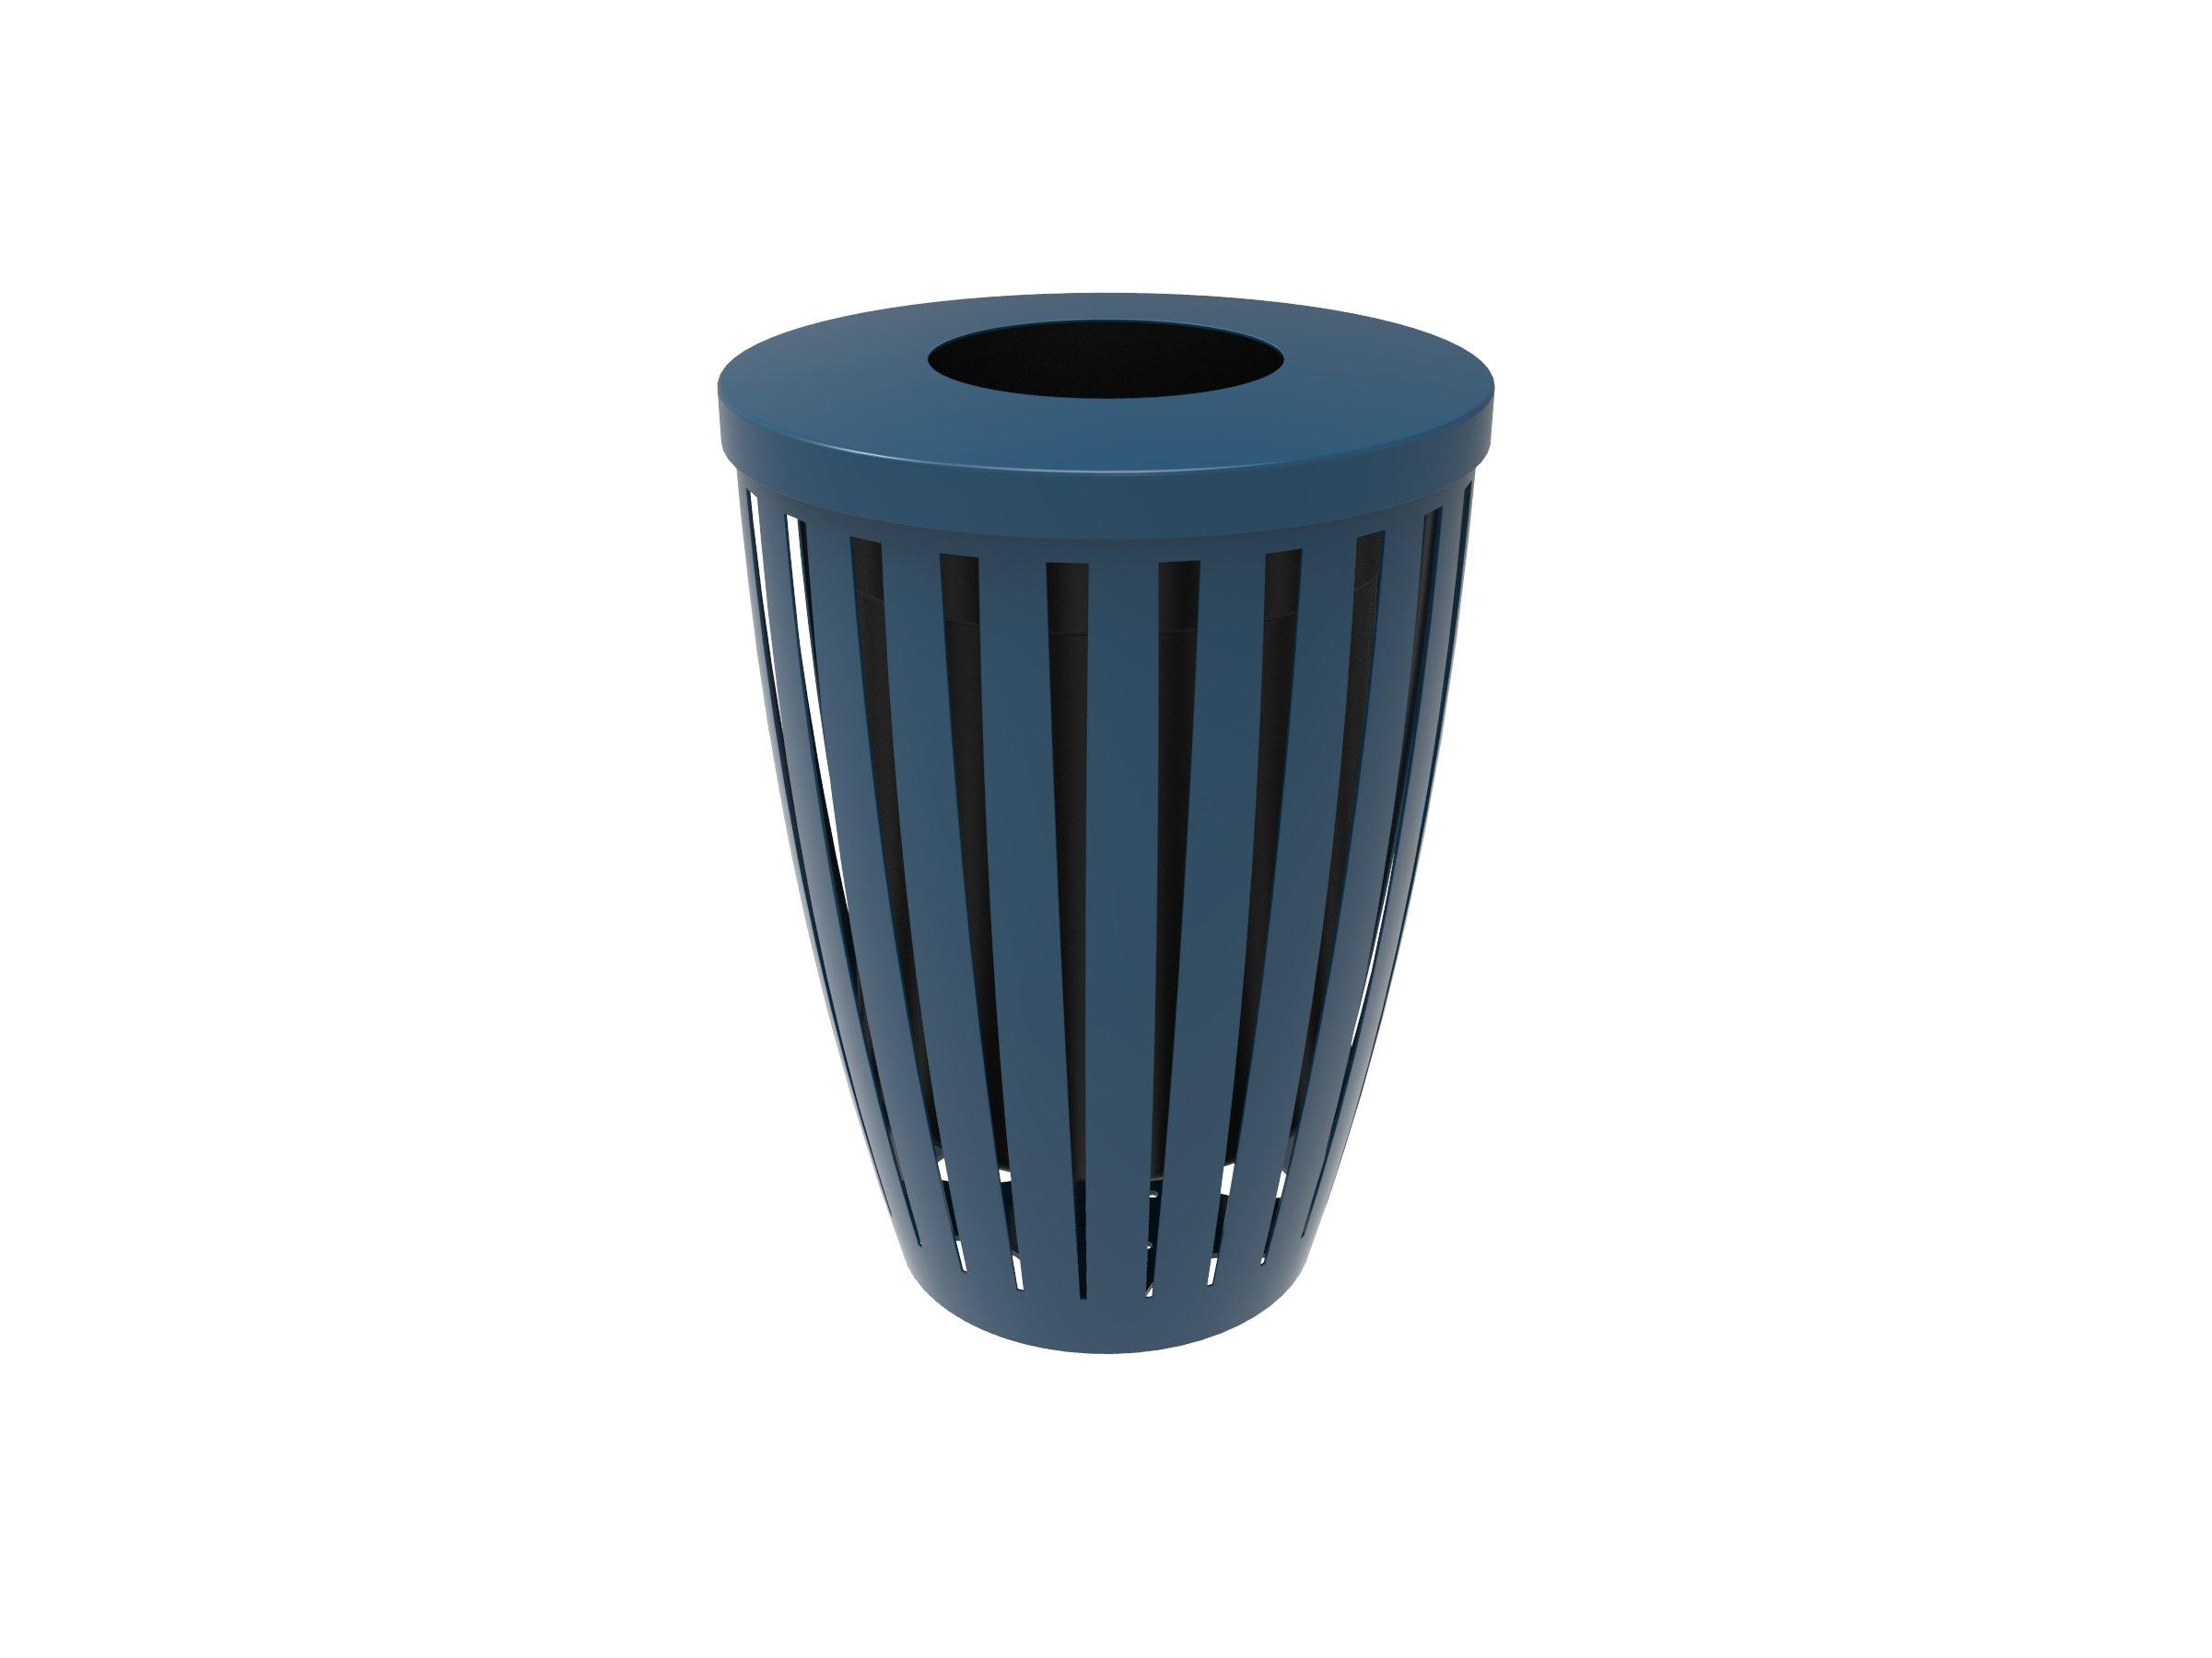 Downtown 32 Gallon Slatted Steel Trash Receptacle